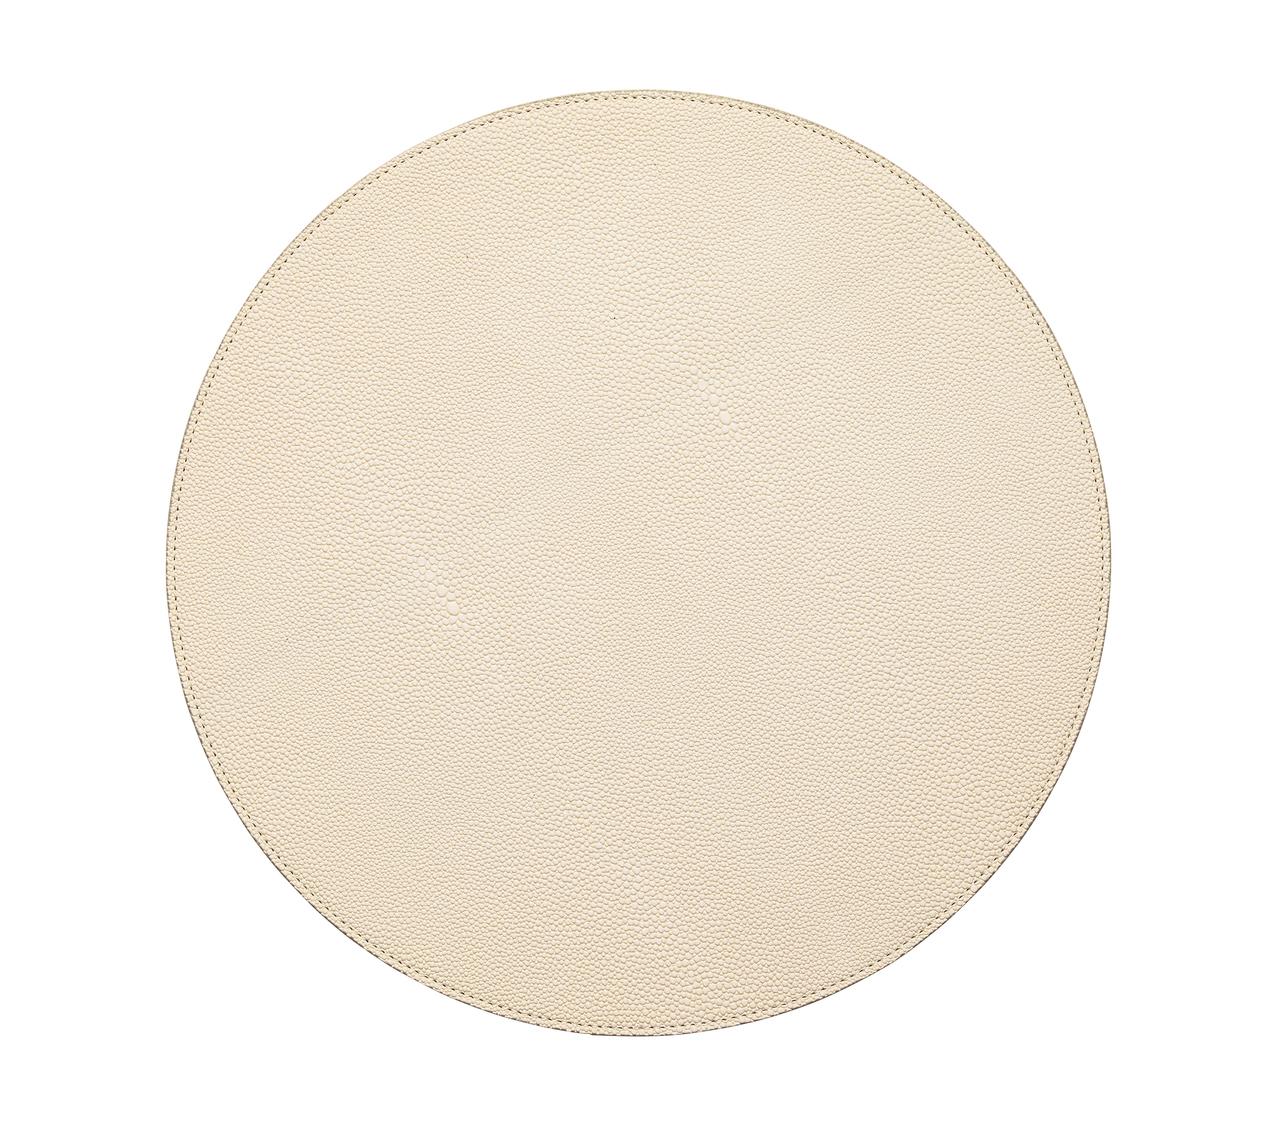 Shagreen Placemat - Ivory